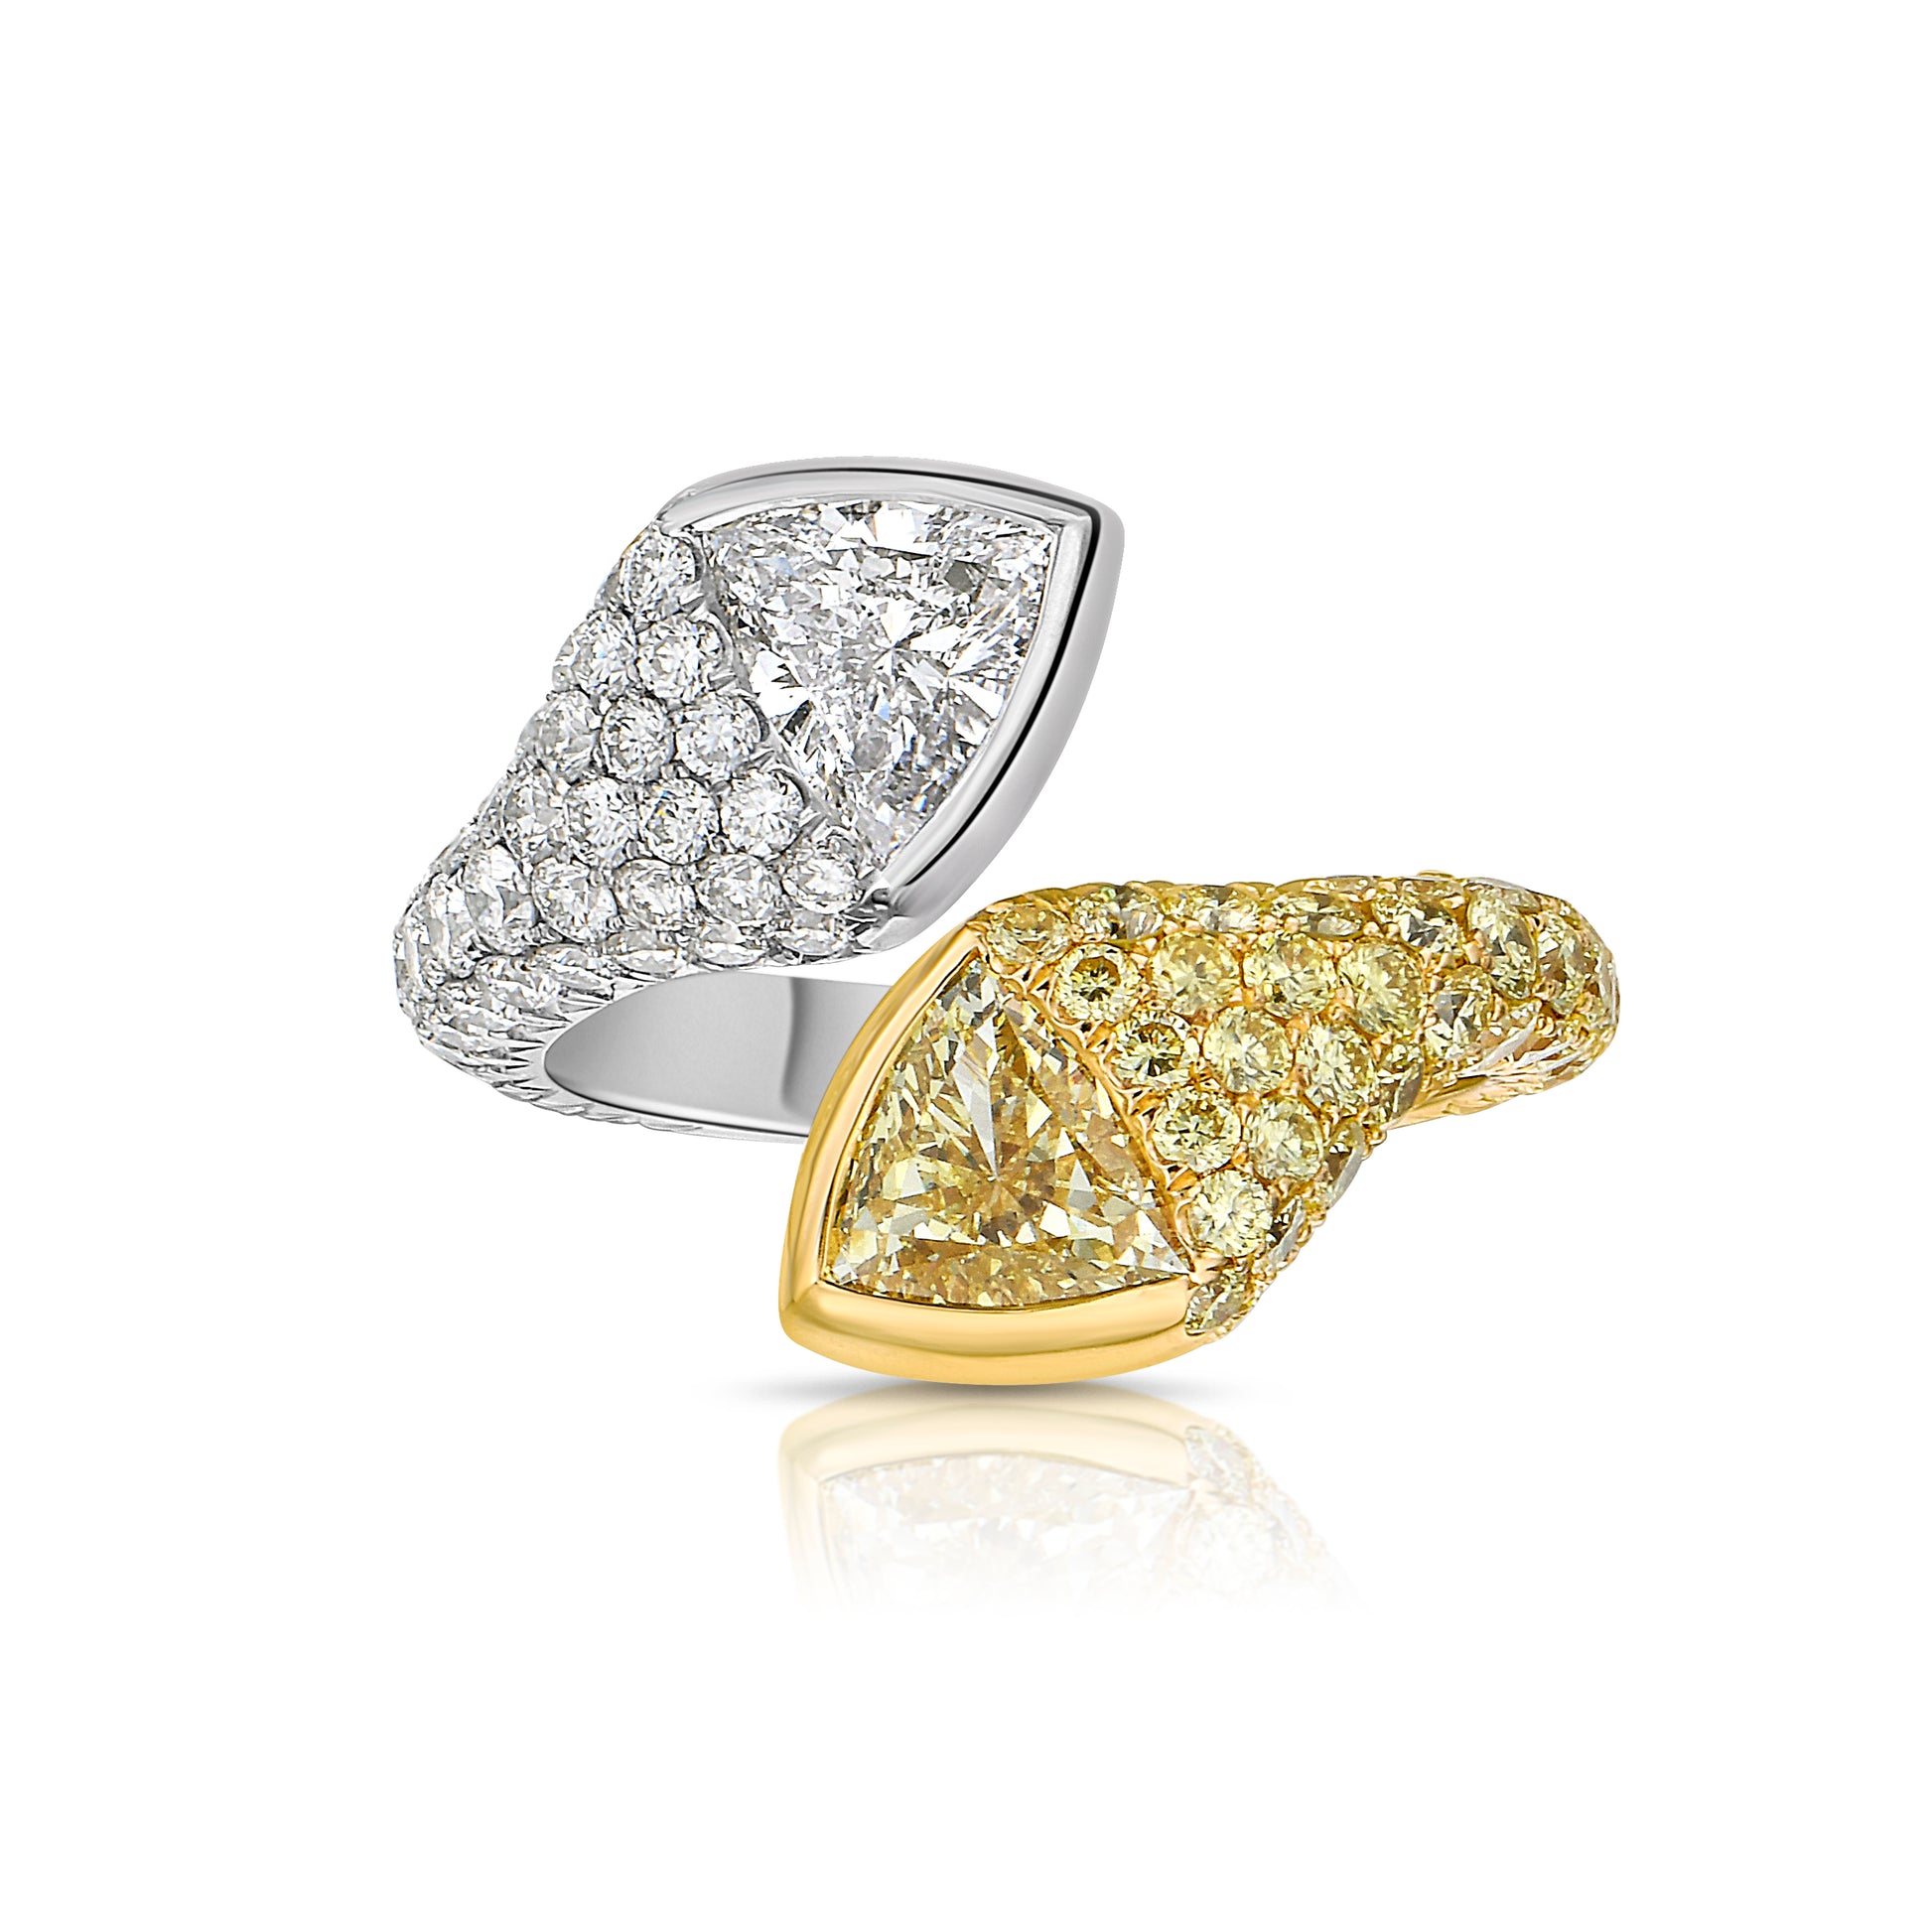 Unique two stone diamond ring with yellow and white diamonds. Perfect statement ring. Diamond Ring.